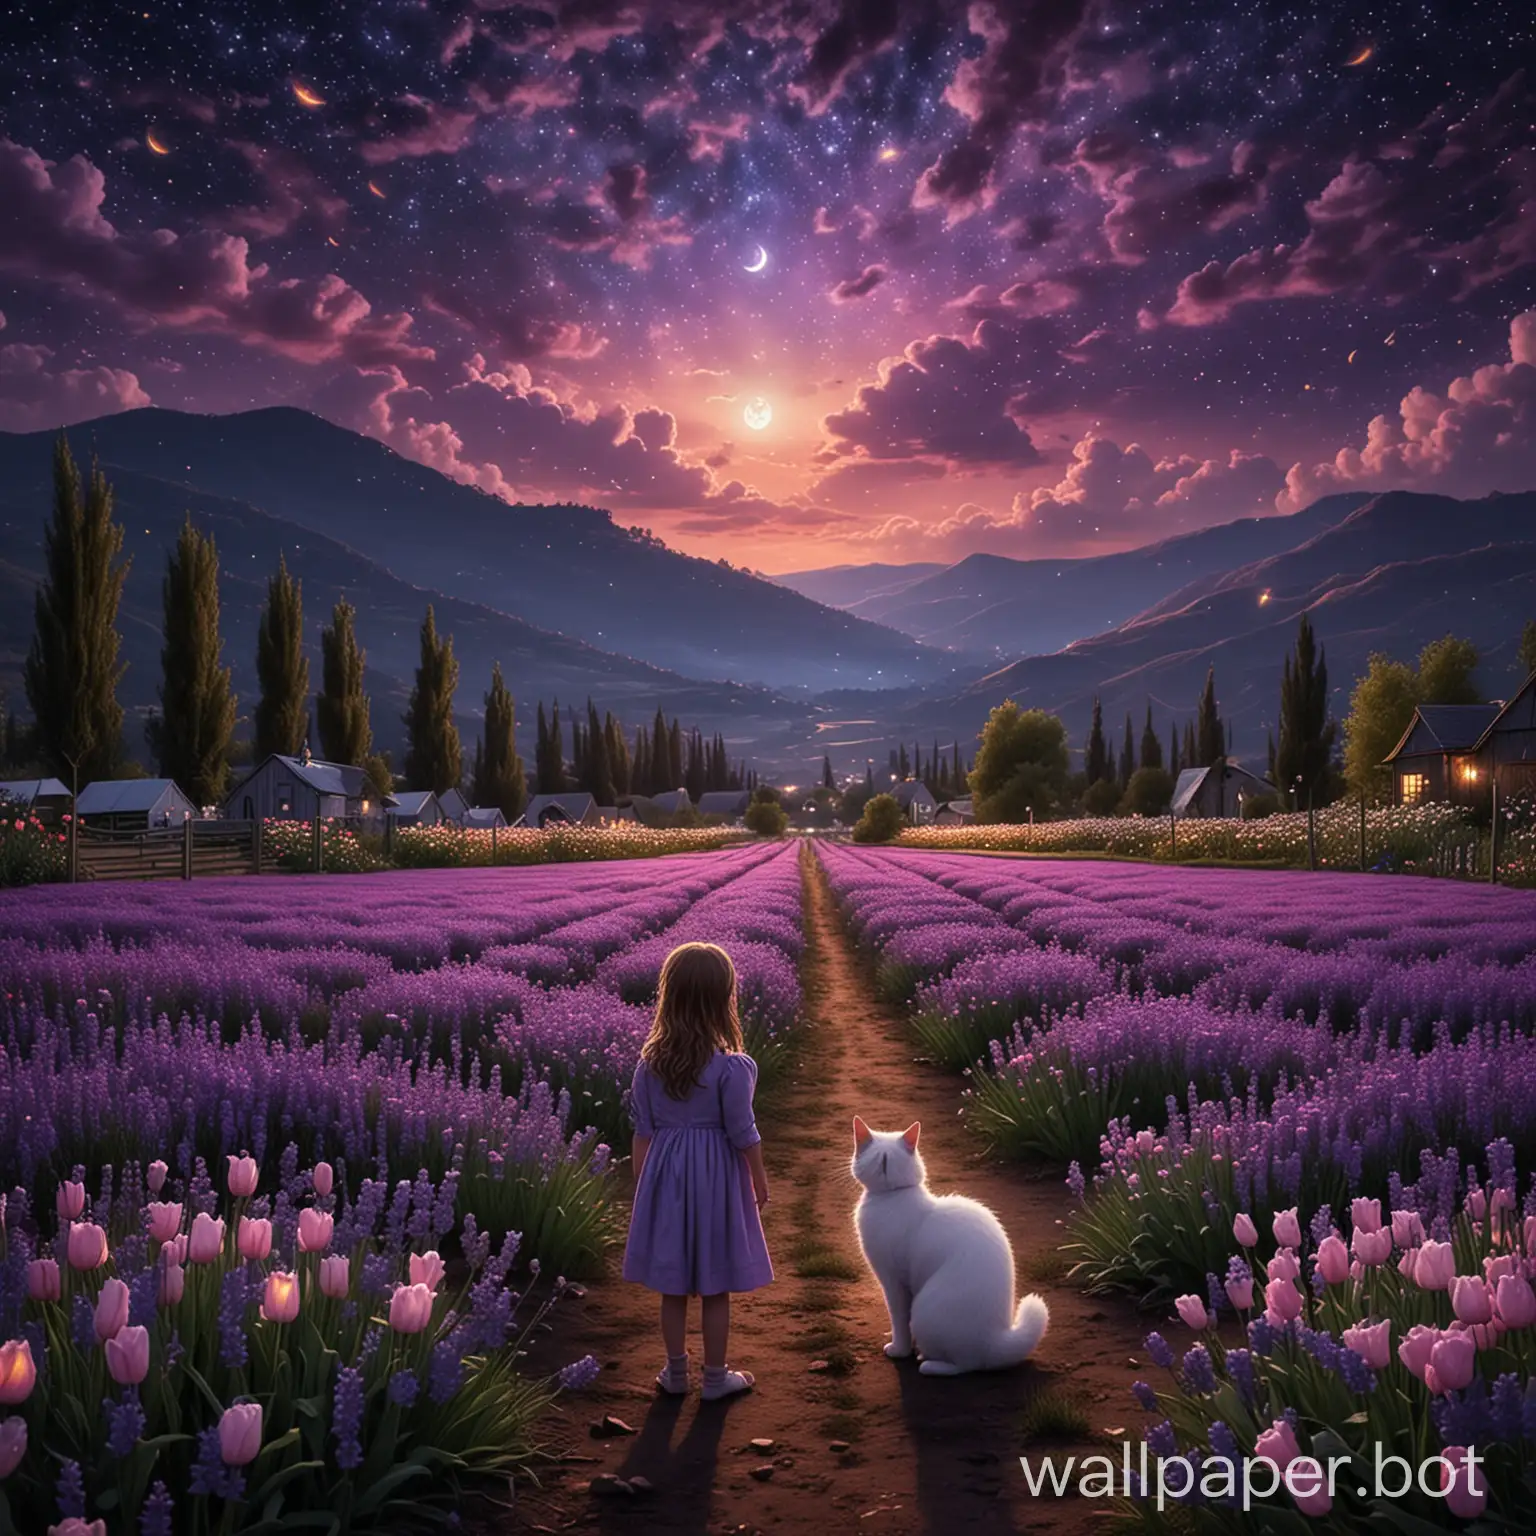 mesmerizing darkest starry night with a crescent moon and a little cute girl with a white furry cat standing in the middle of a huge beautiful lavender and tulip farm admiring fireflies.